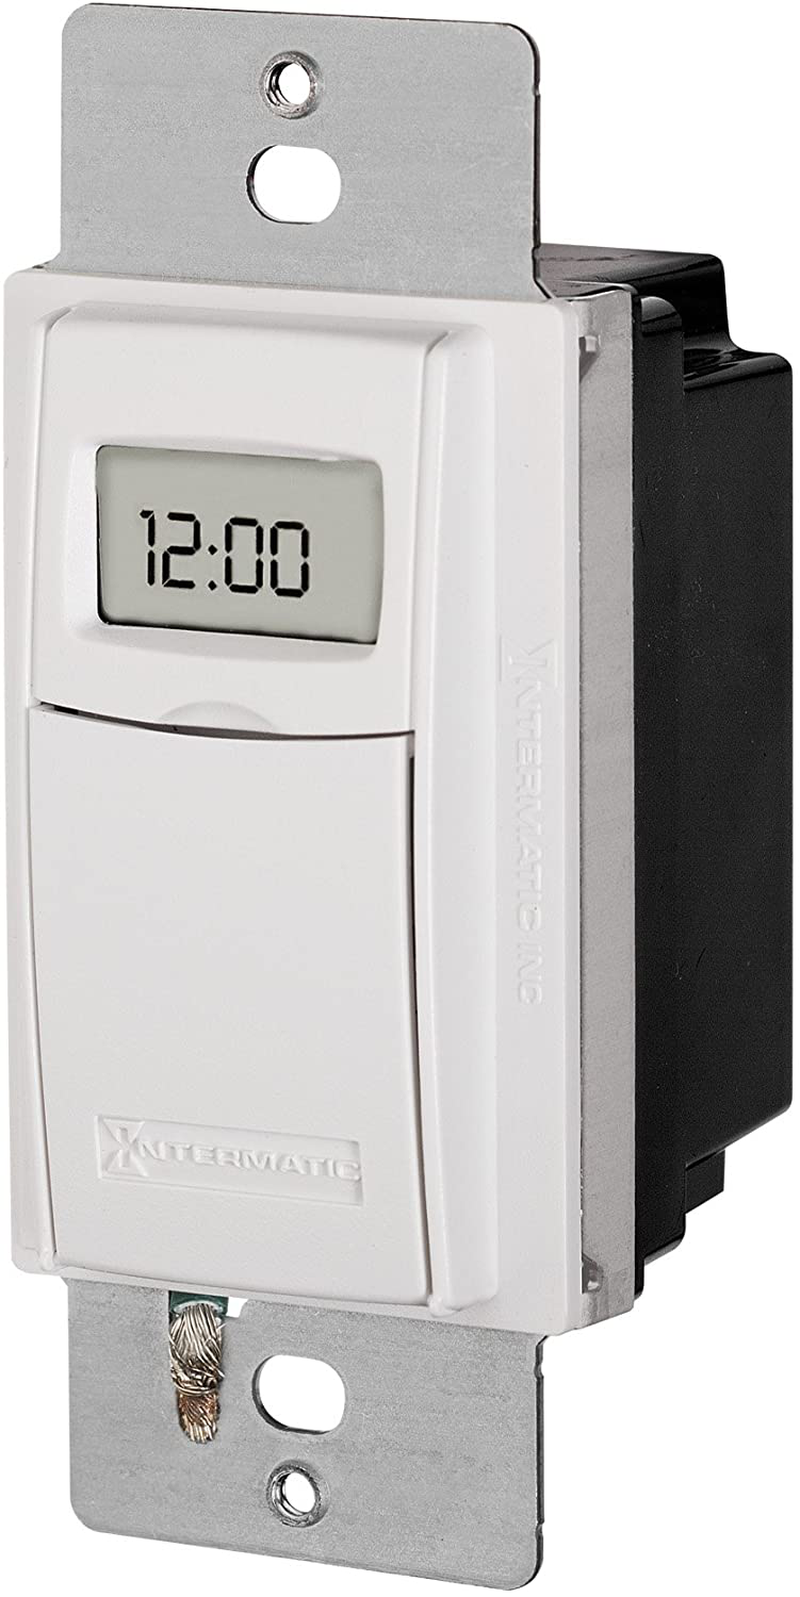 Intermatic ST01 7 Day Programmable In Wall Digital Timer Switch for Lights and Appliances, Astronomic, Self Adjusting, Heavy Duty,White